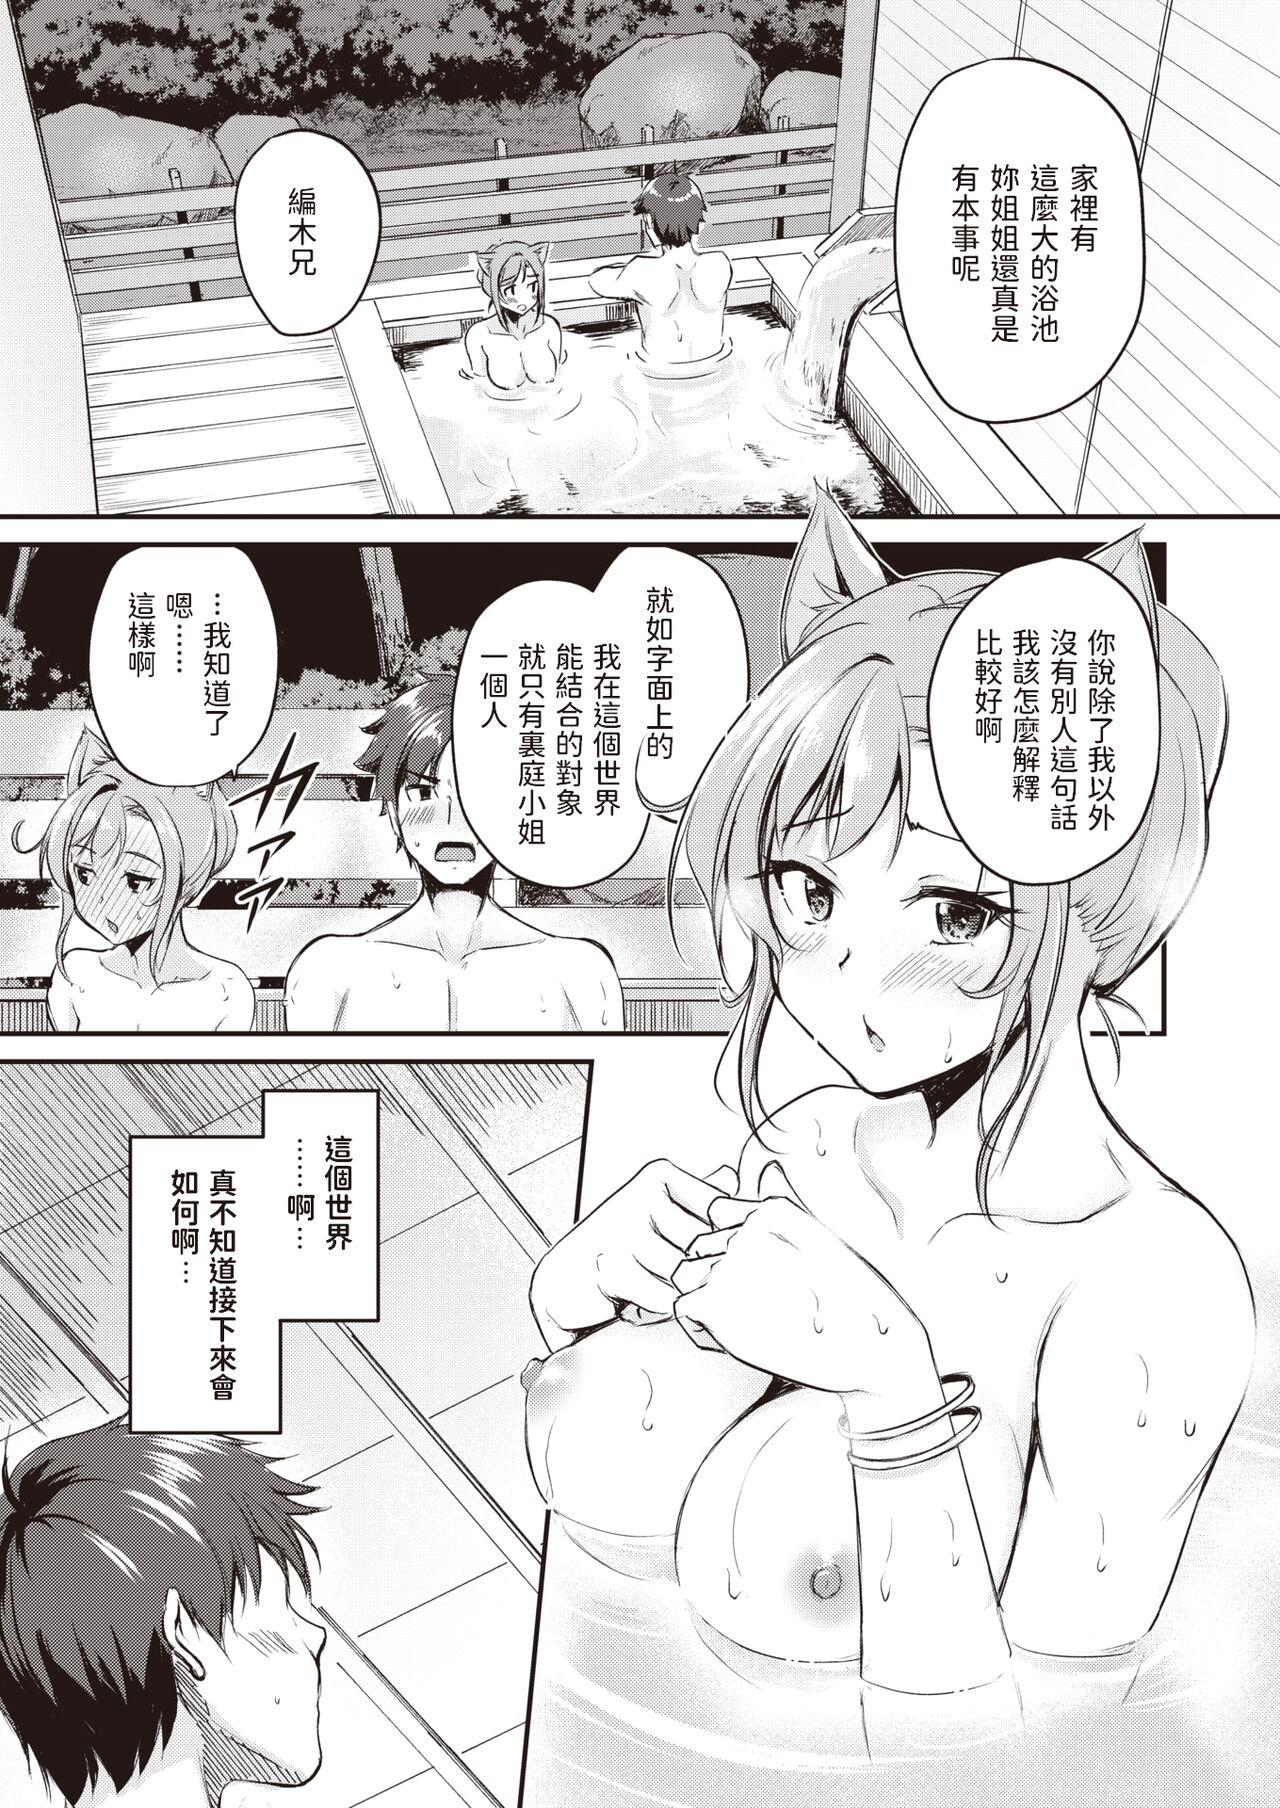 Doggy Style [れぐでく] ケモミミの占術師~姉の謀略~ (異世快楽天 Vol.7) 中文翻譯 Homemade - Page 27